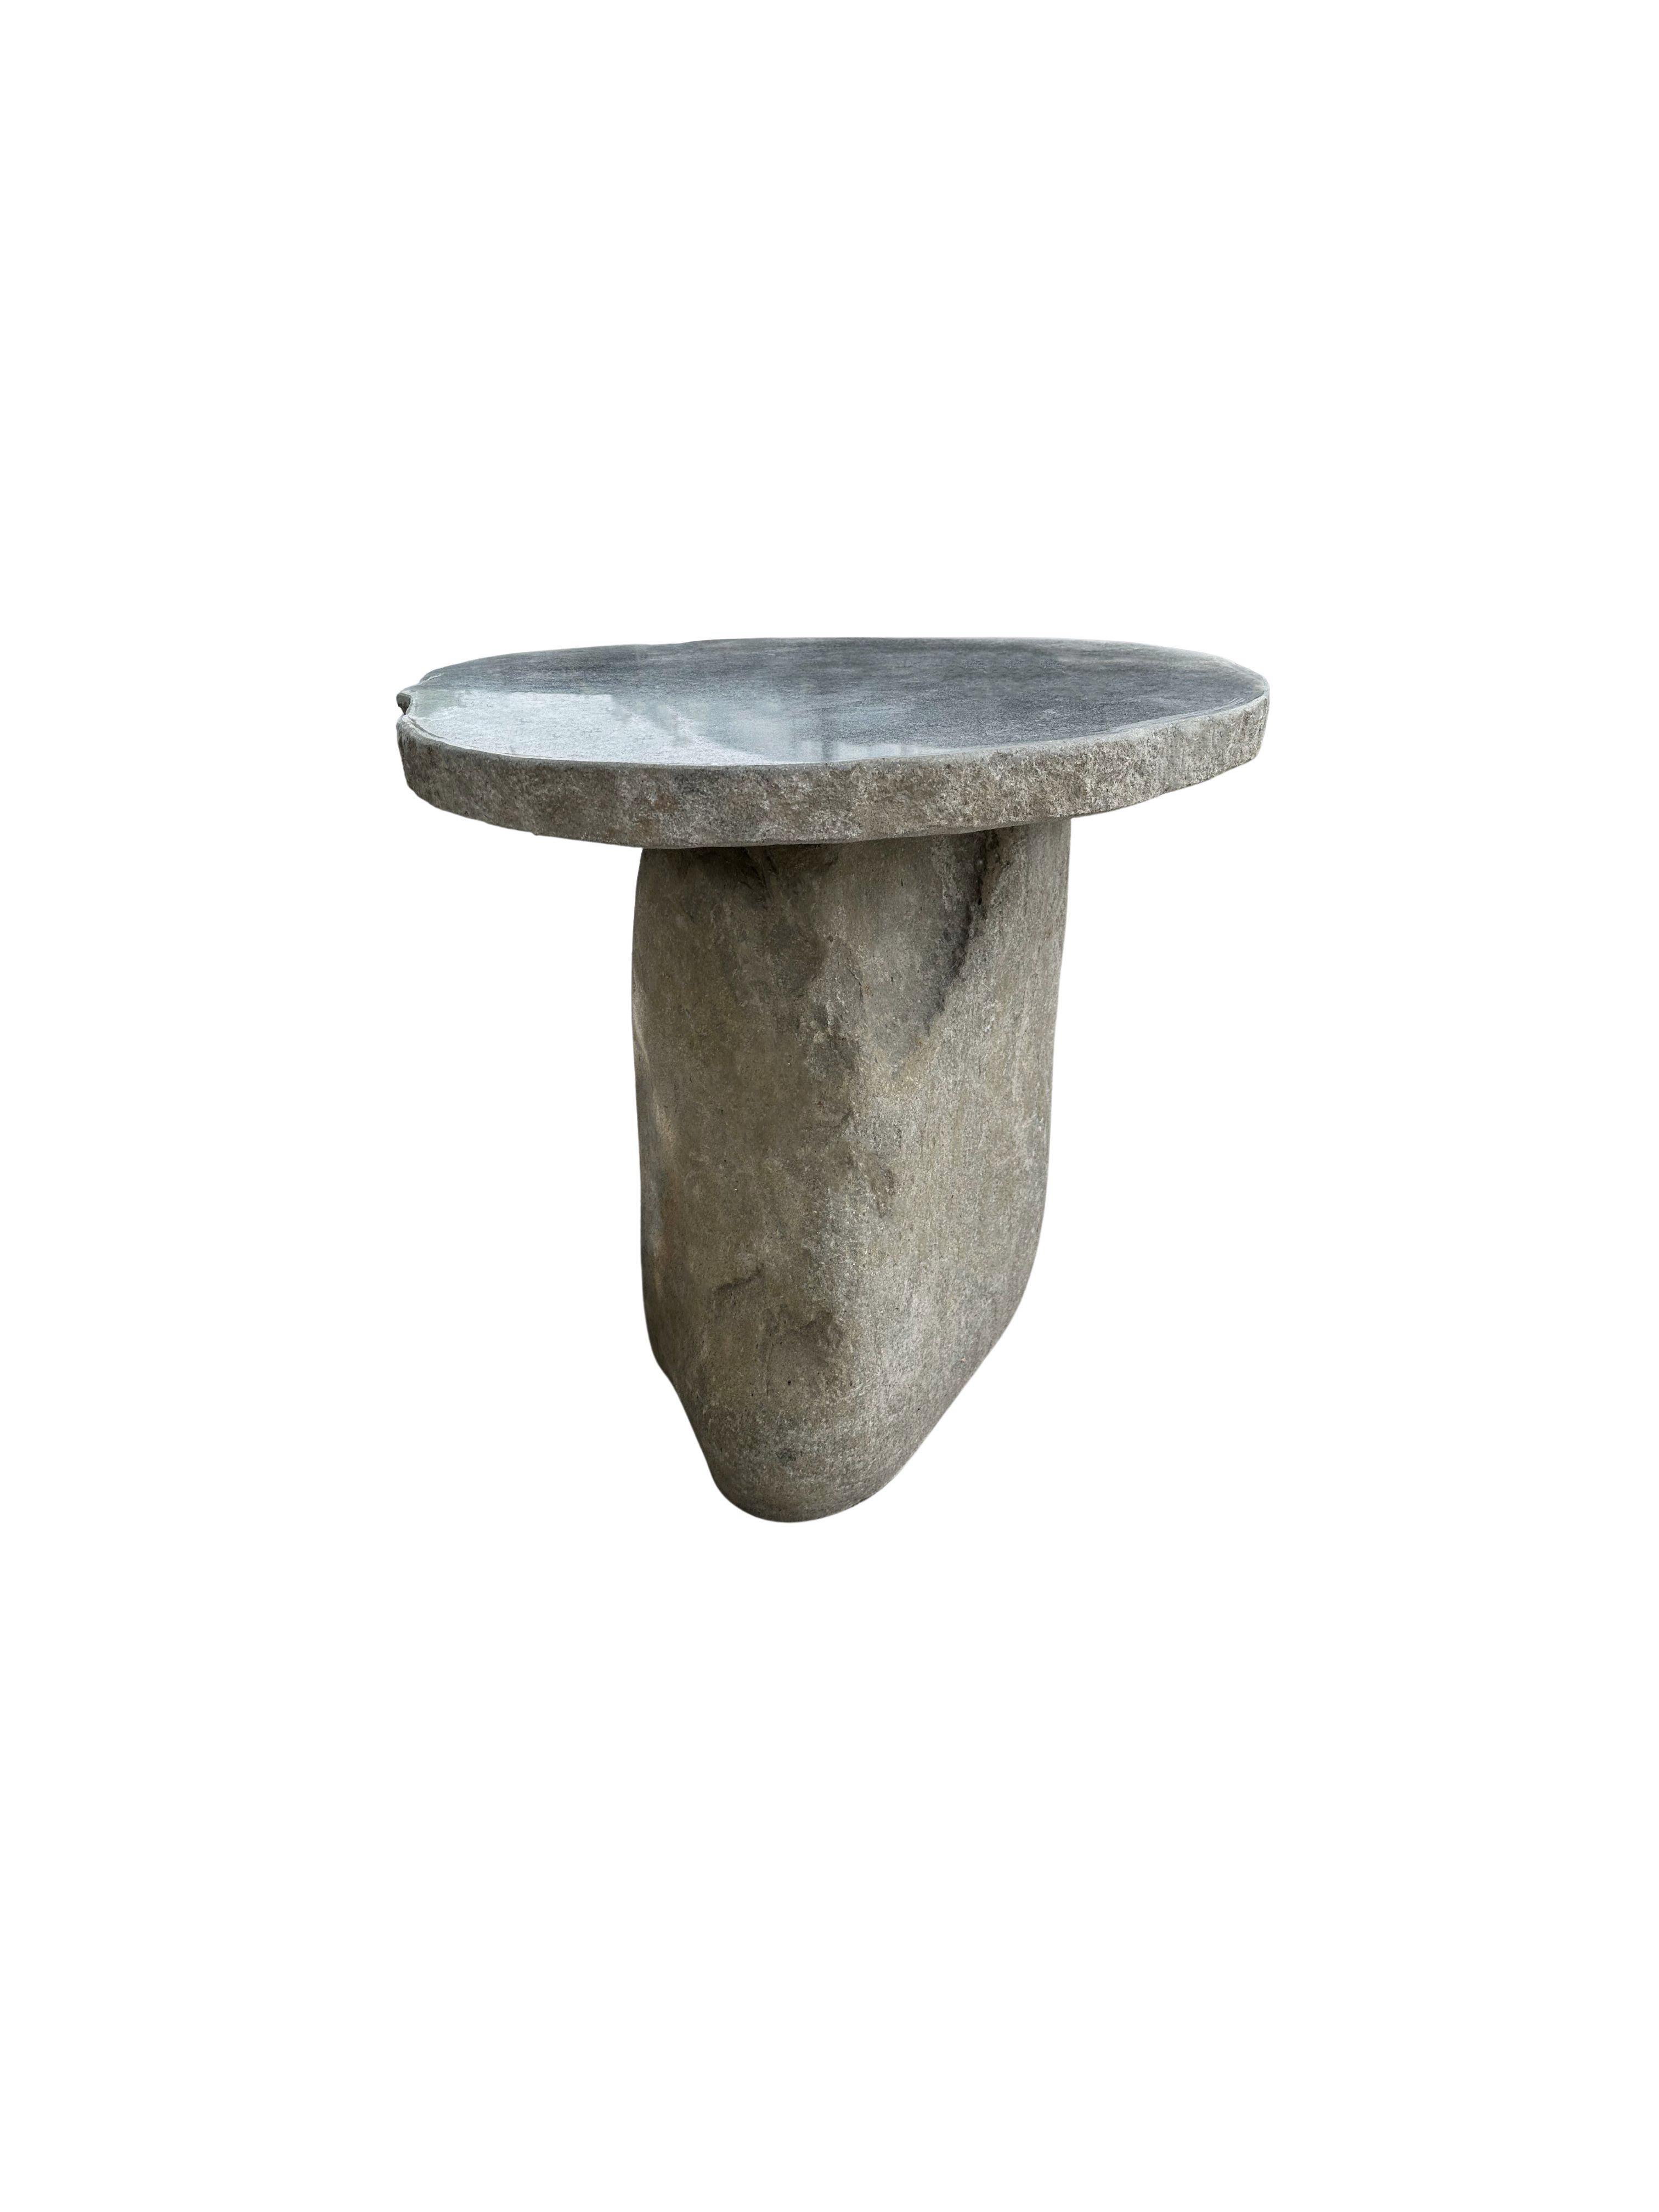 Contemporary Solid Stone Round Table from Java, Indonesia